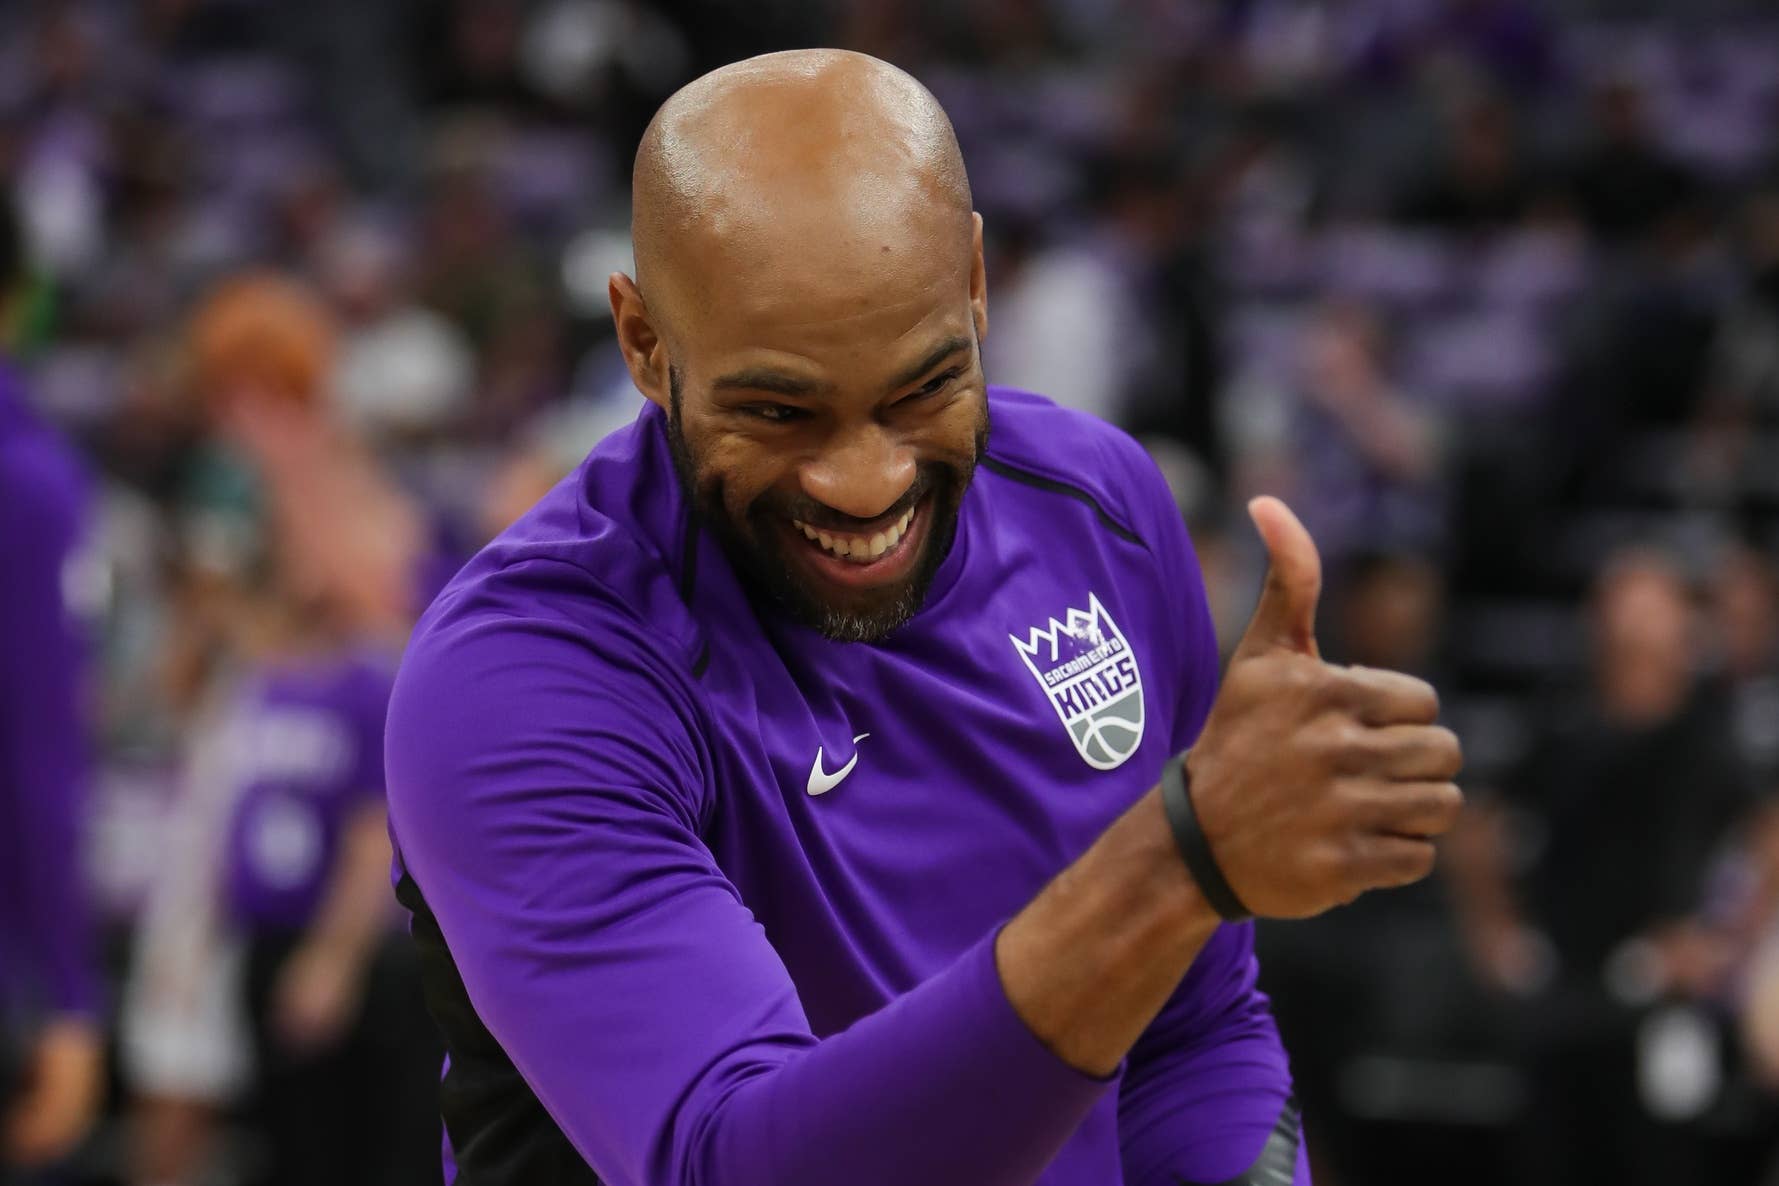 Vince Carter Is Campaigning For Nike to Retro His Signature Sneakers